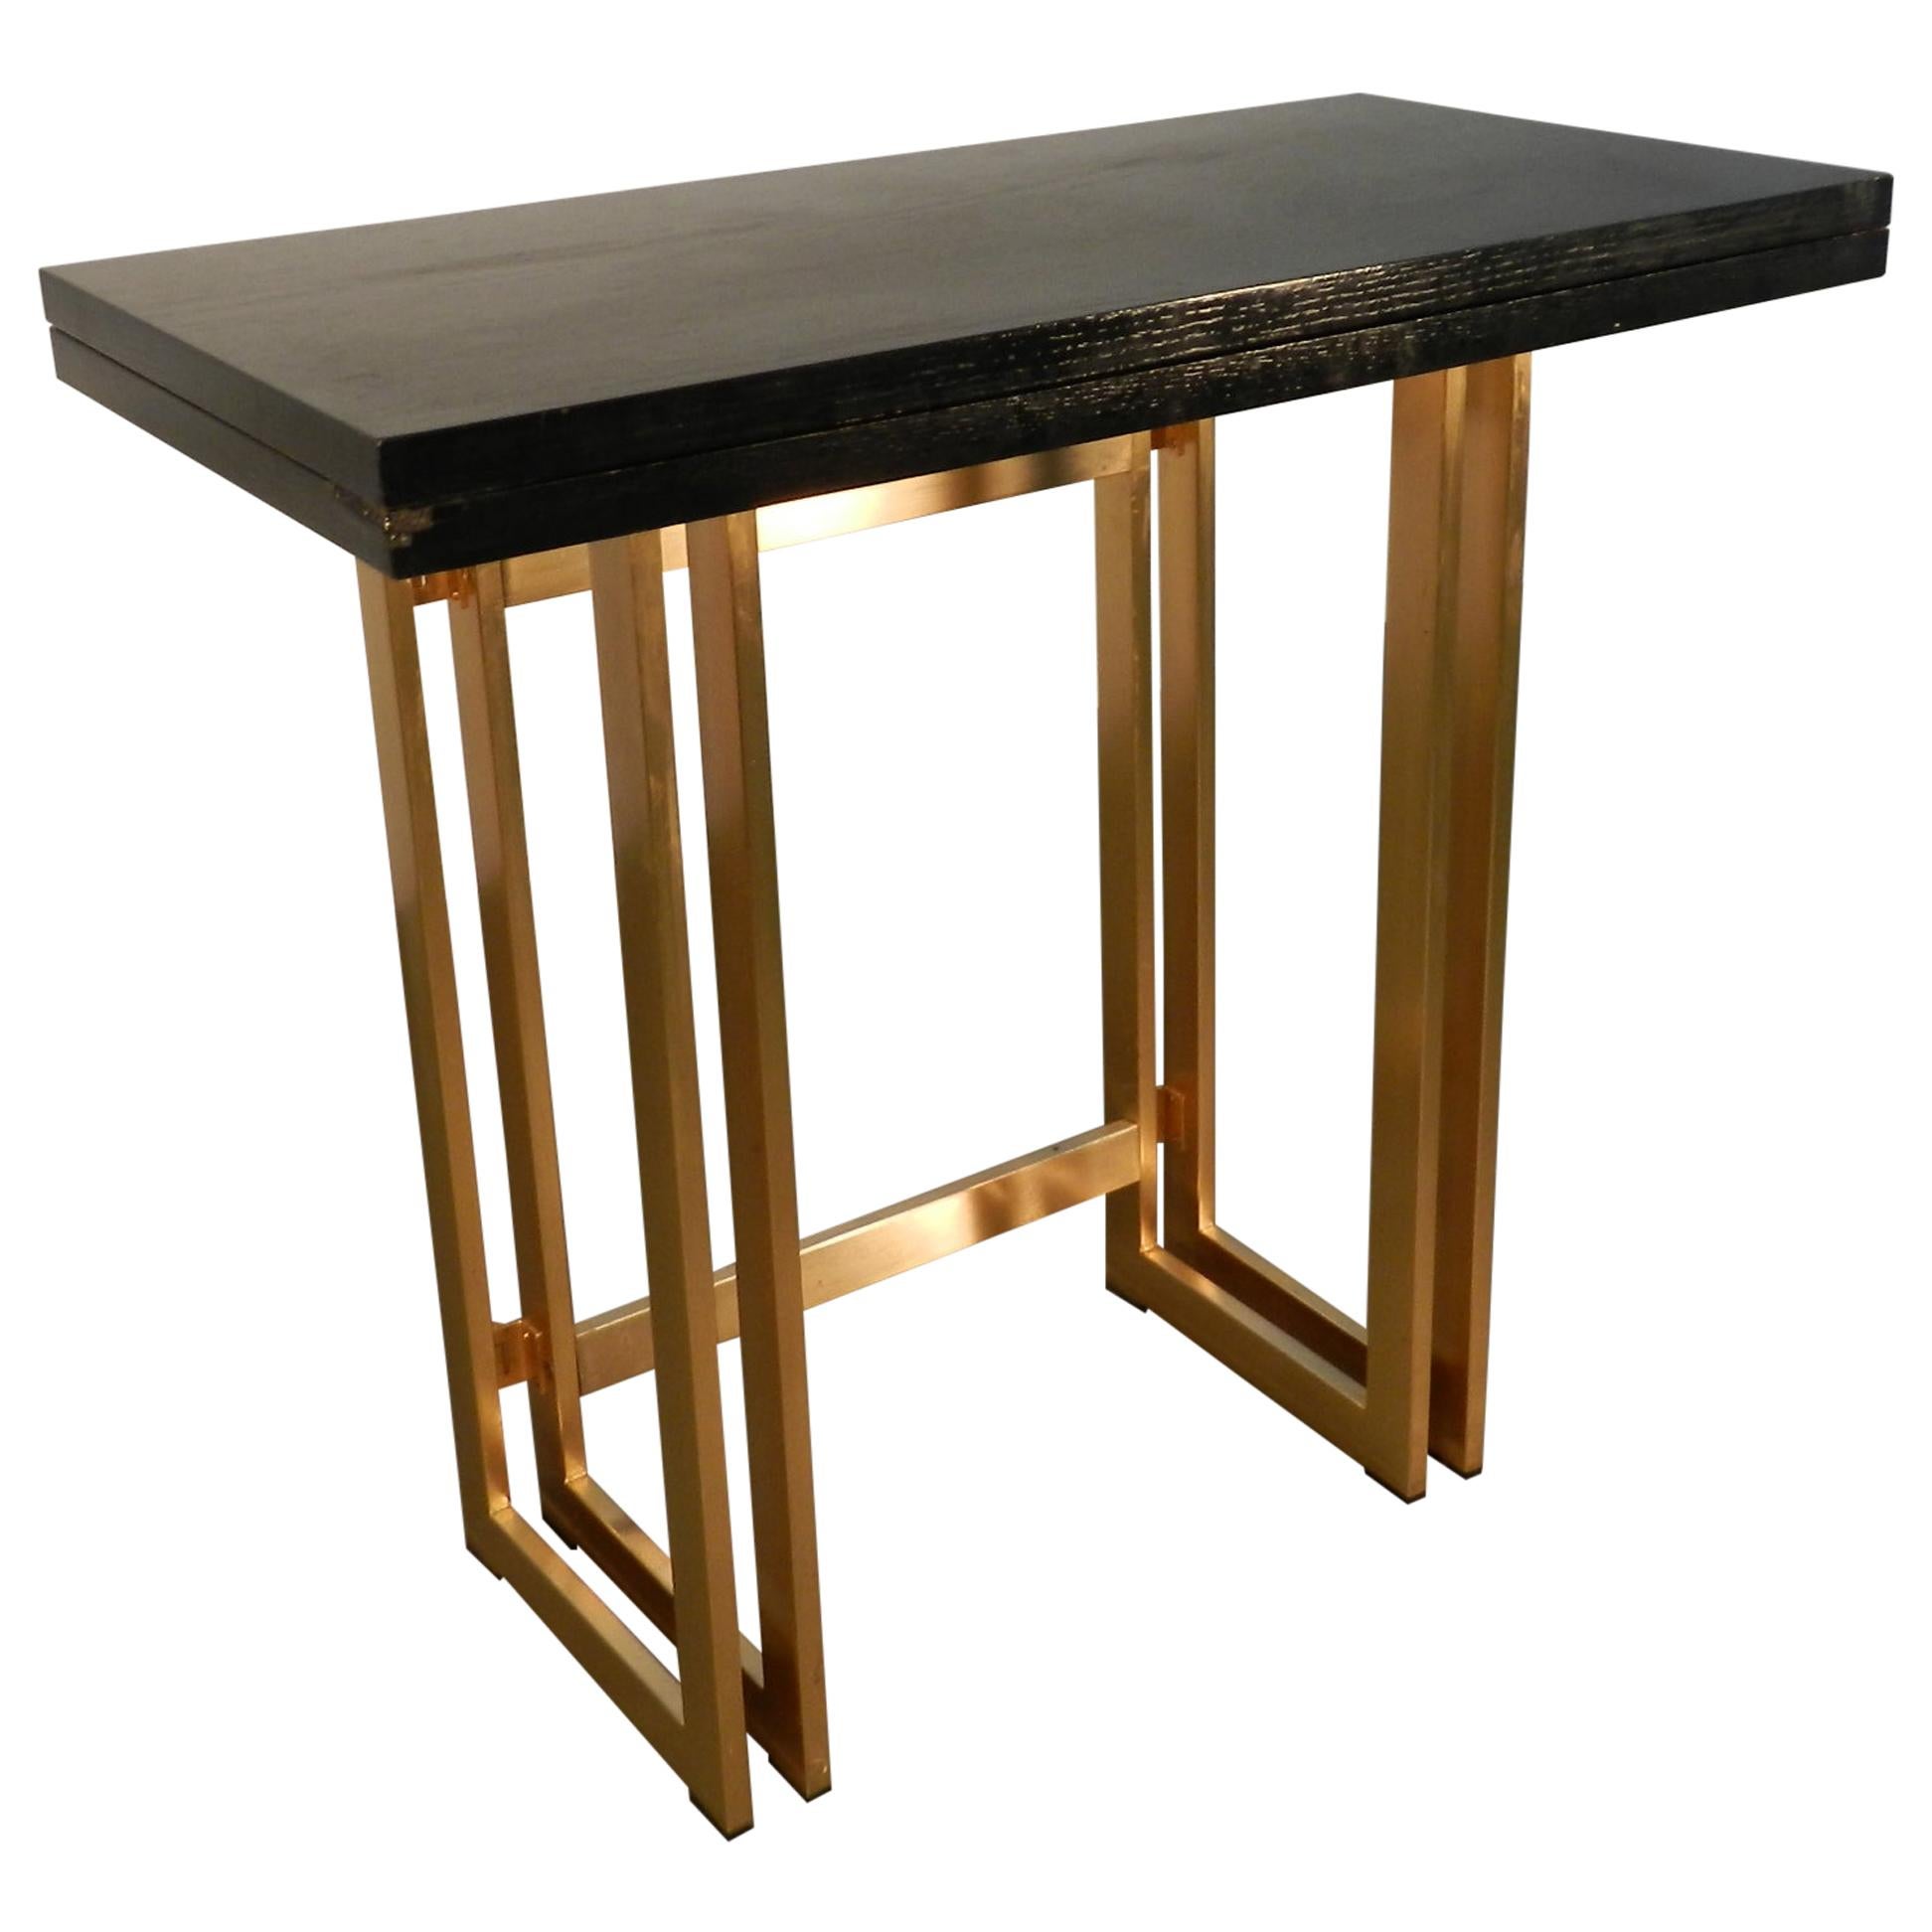 Artelano, Italian Midcentury steel and stained oak Extending Console Table, 1970